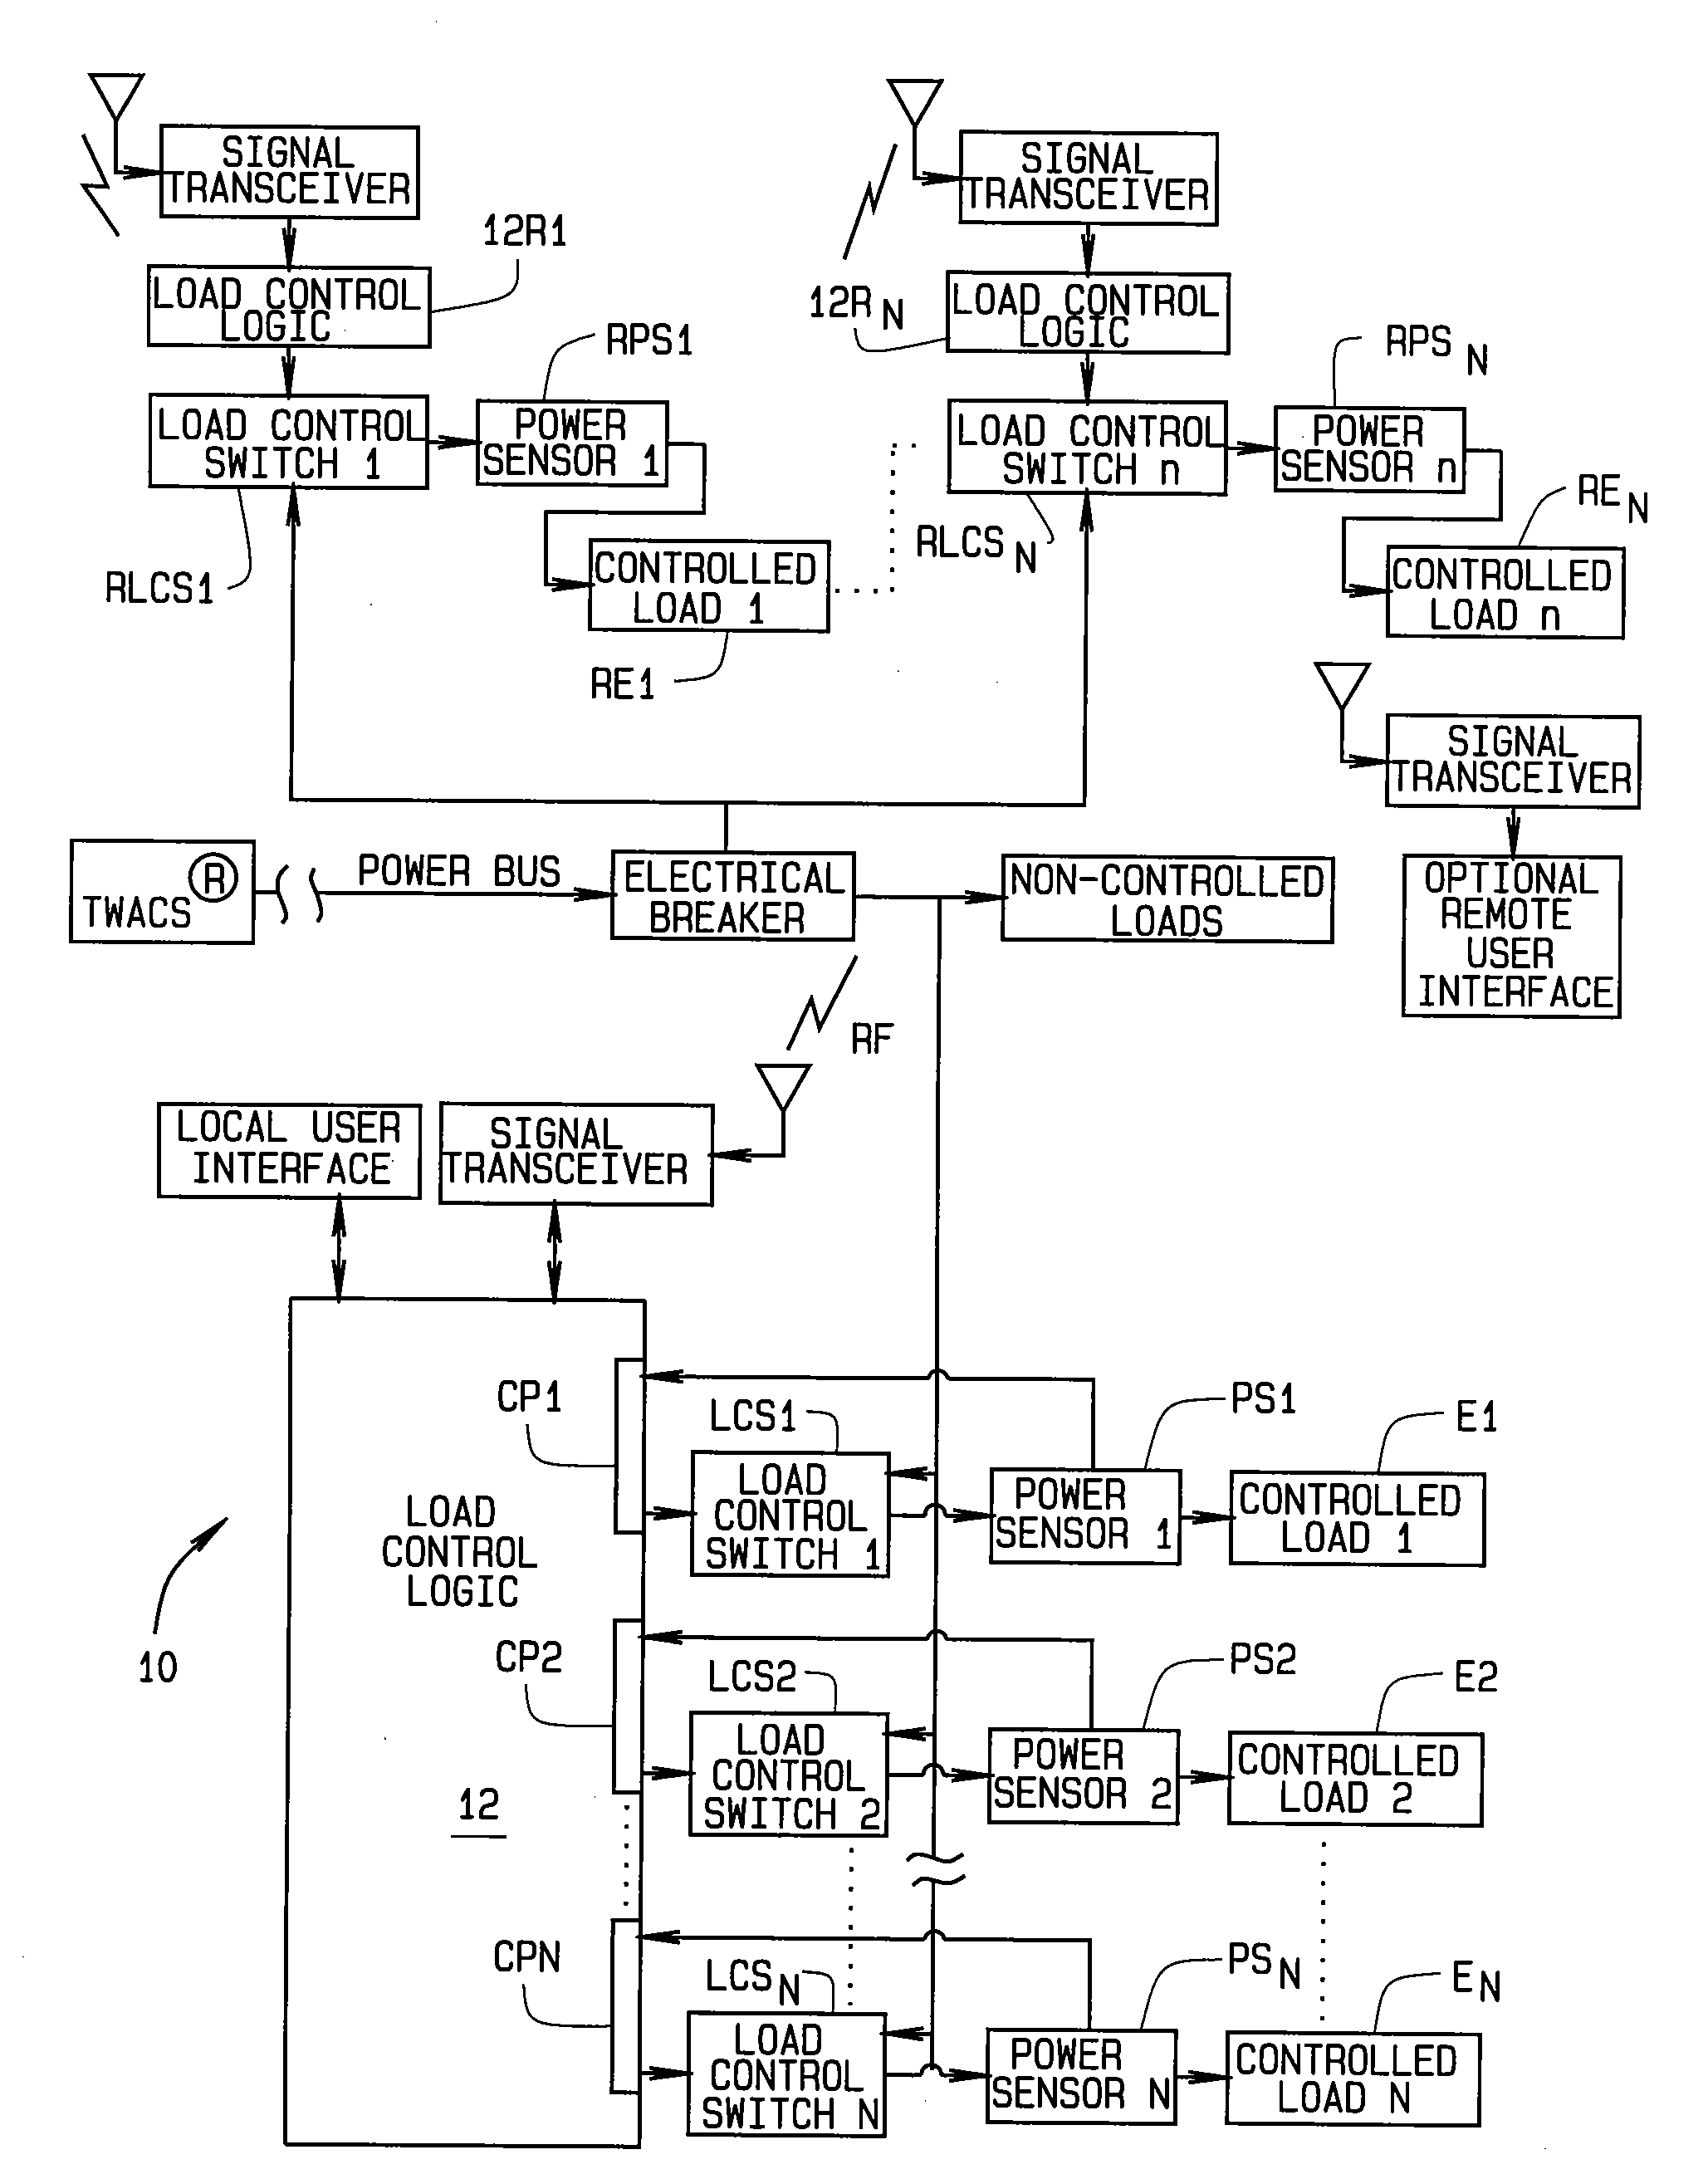 Method for load control using temporal measurements of energy for individual pieces of equipment